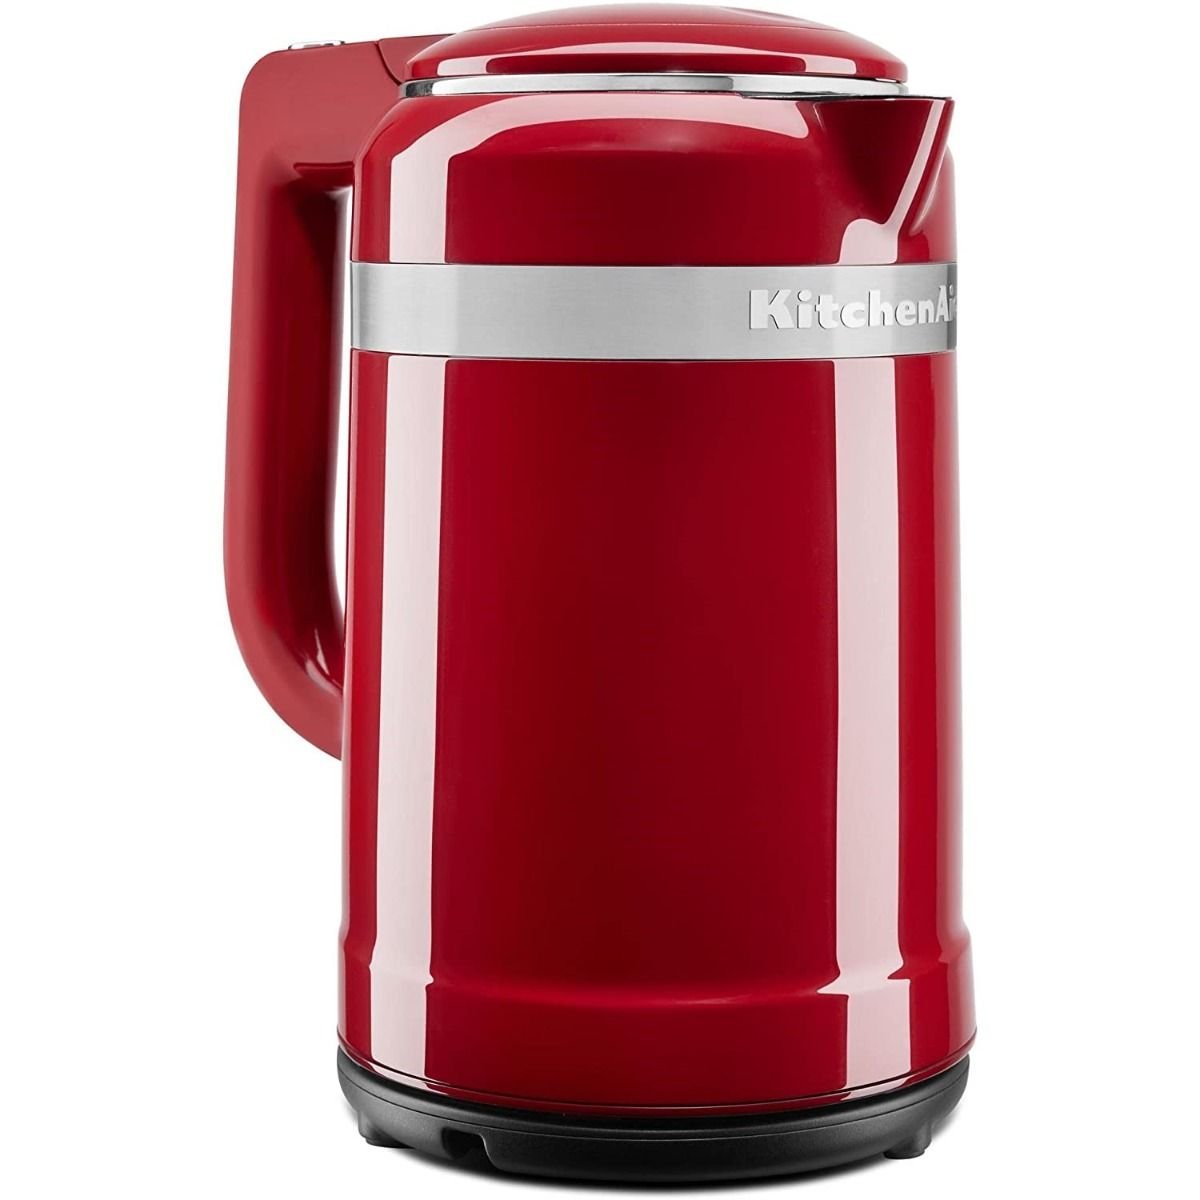 KitchenAid 1.5 L Pro Line Series Electric Kettle in Candy Apple Red